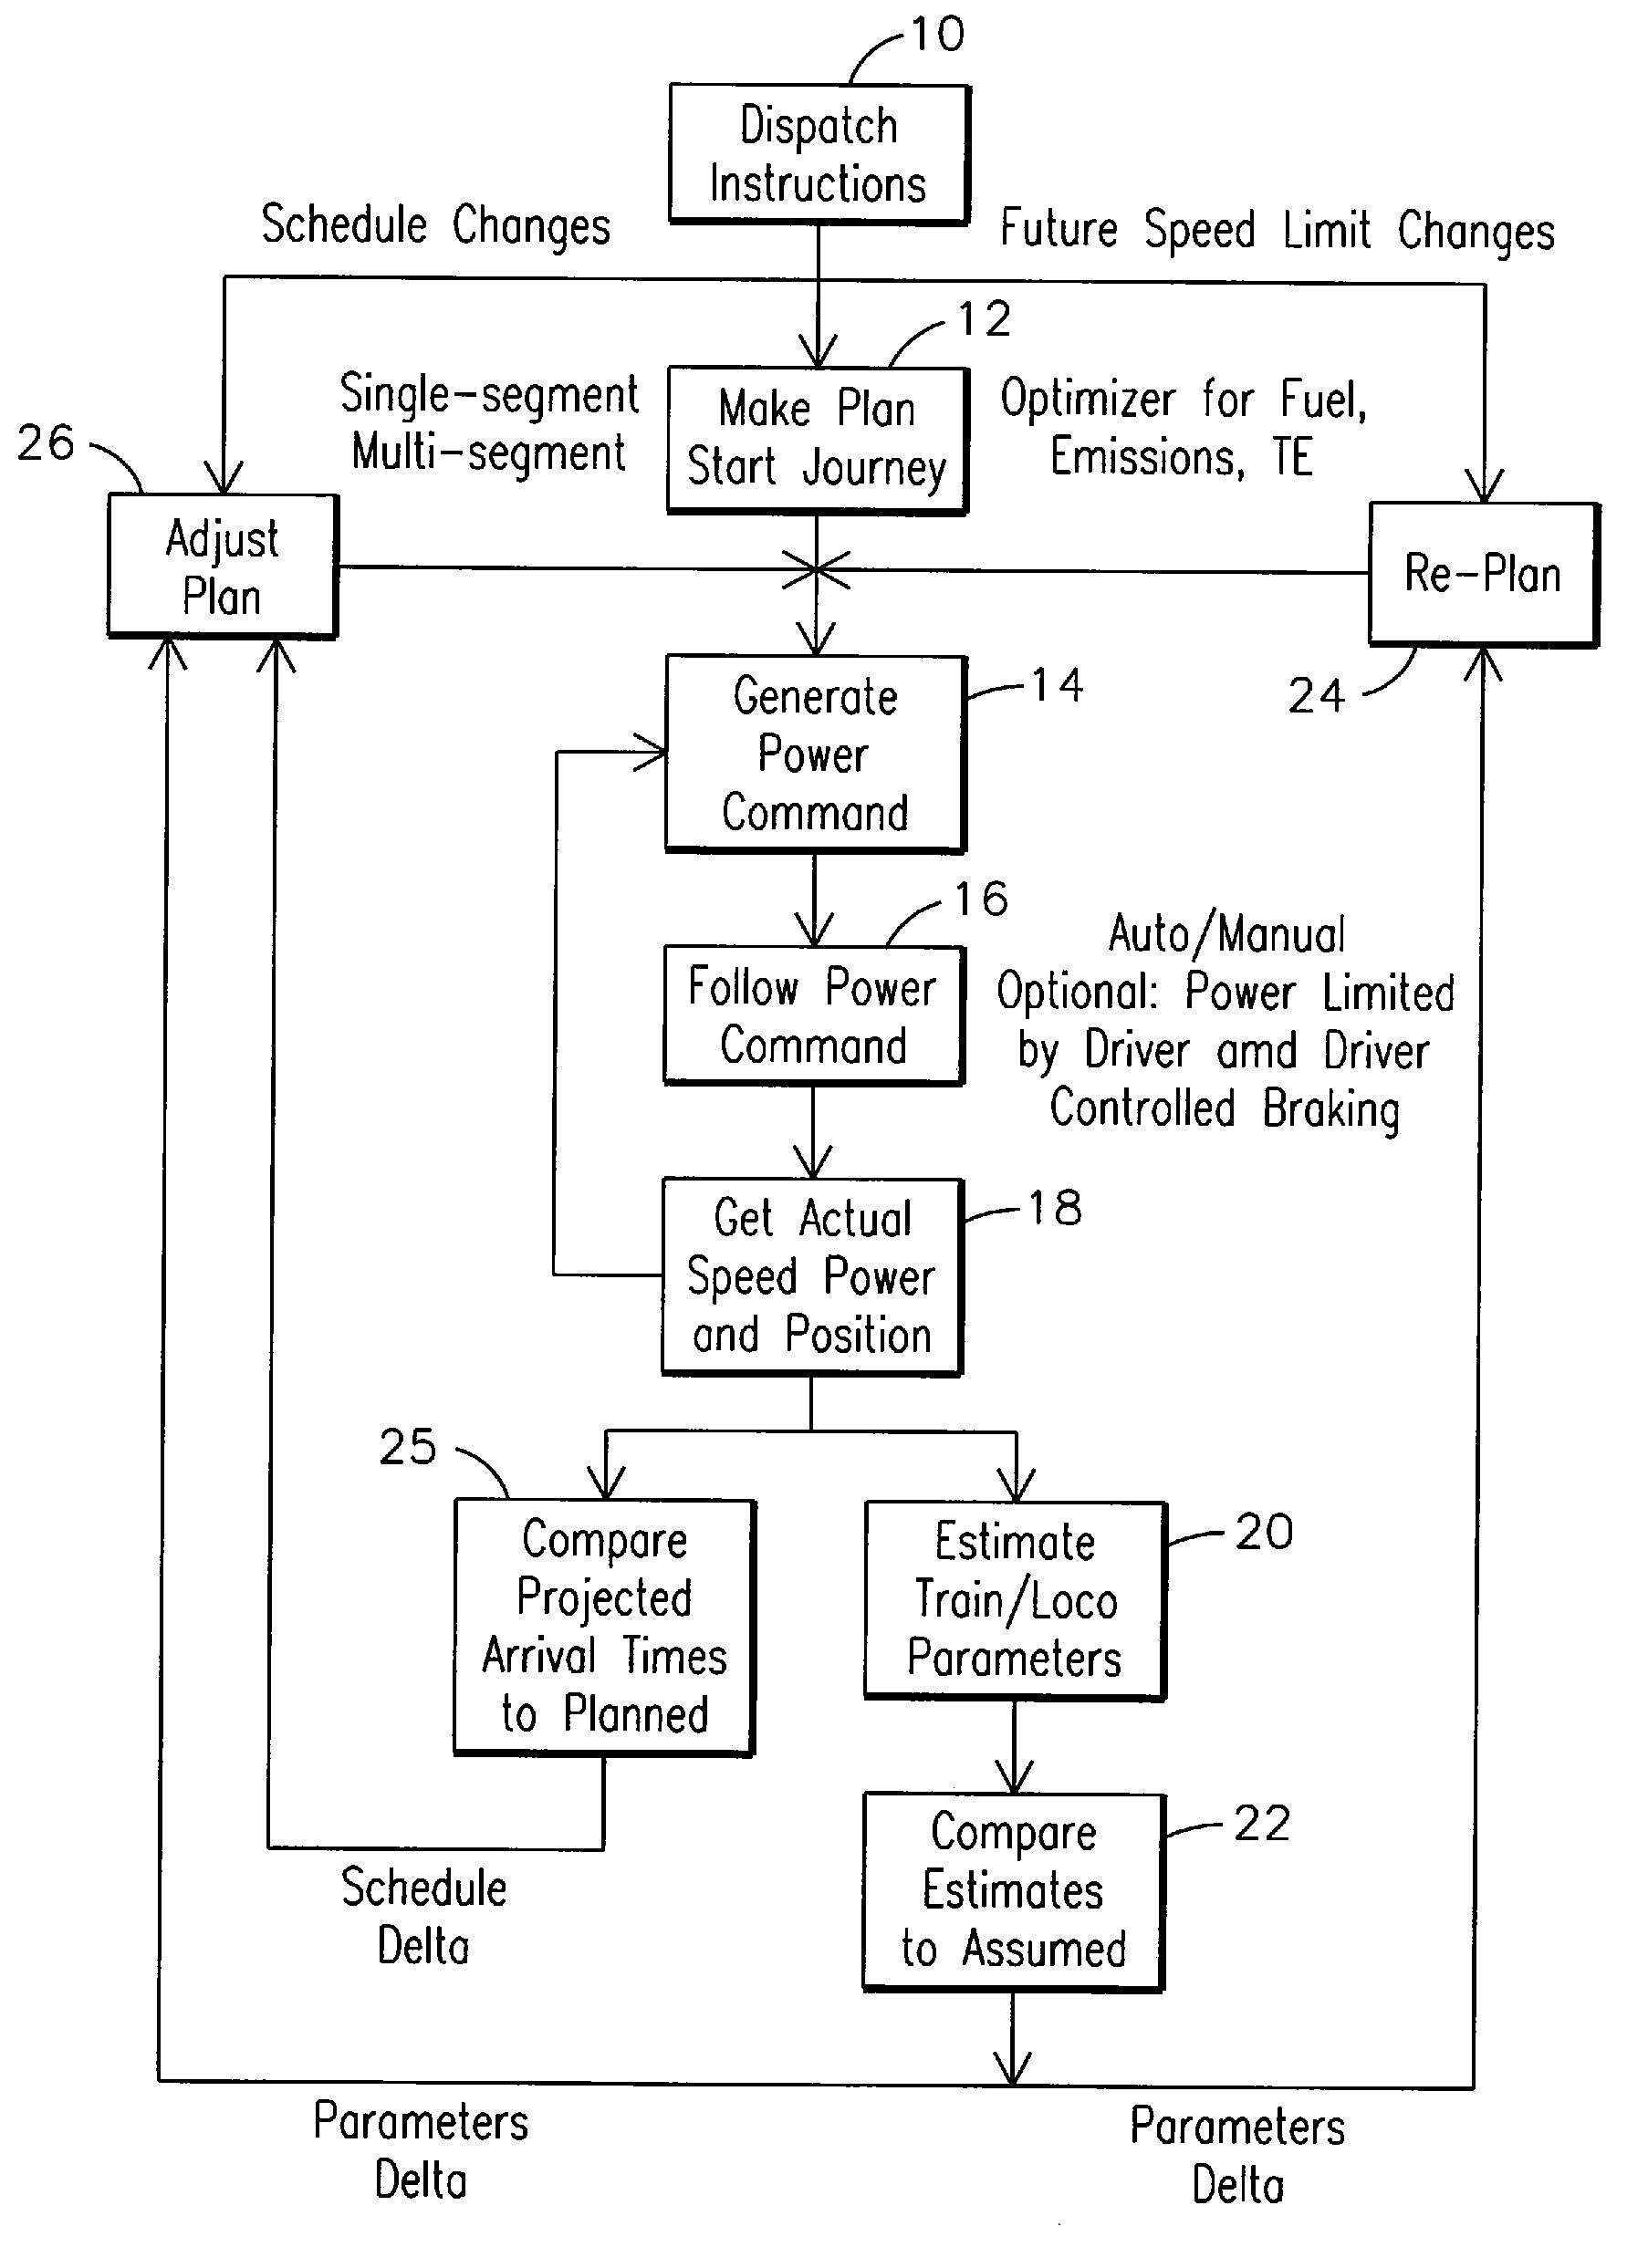 Trip Optimization System and Method for a Vehicle